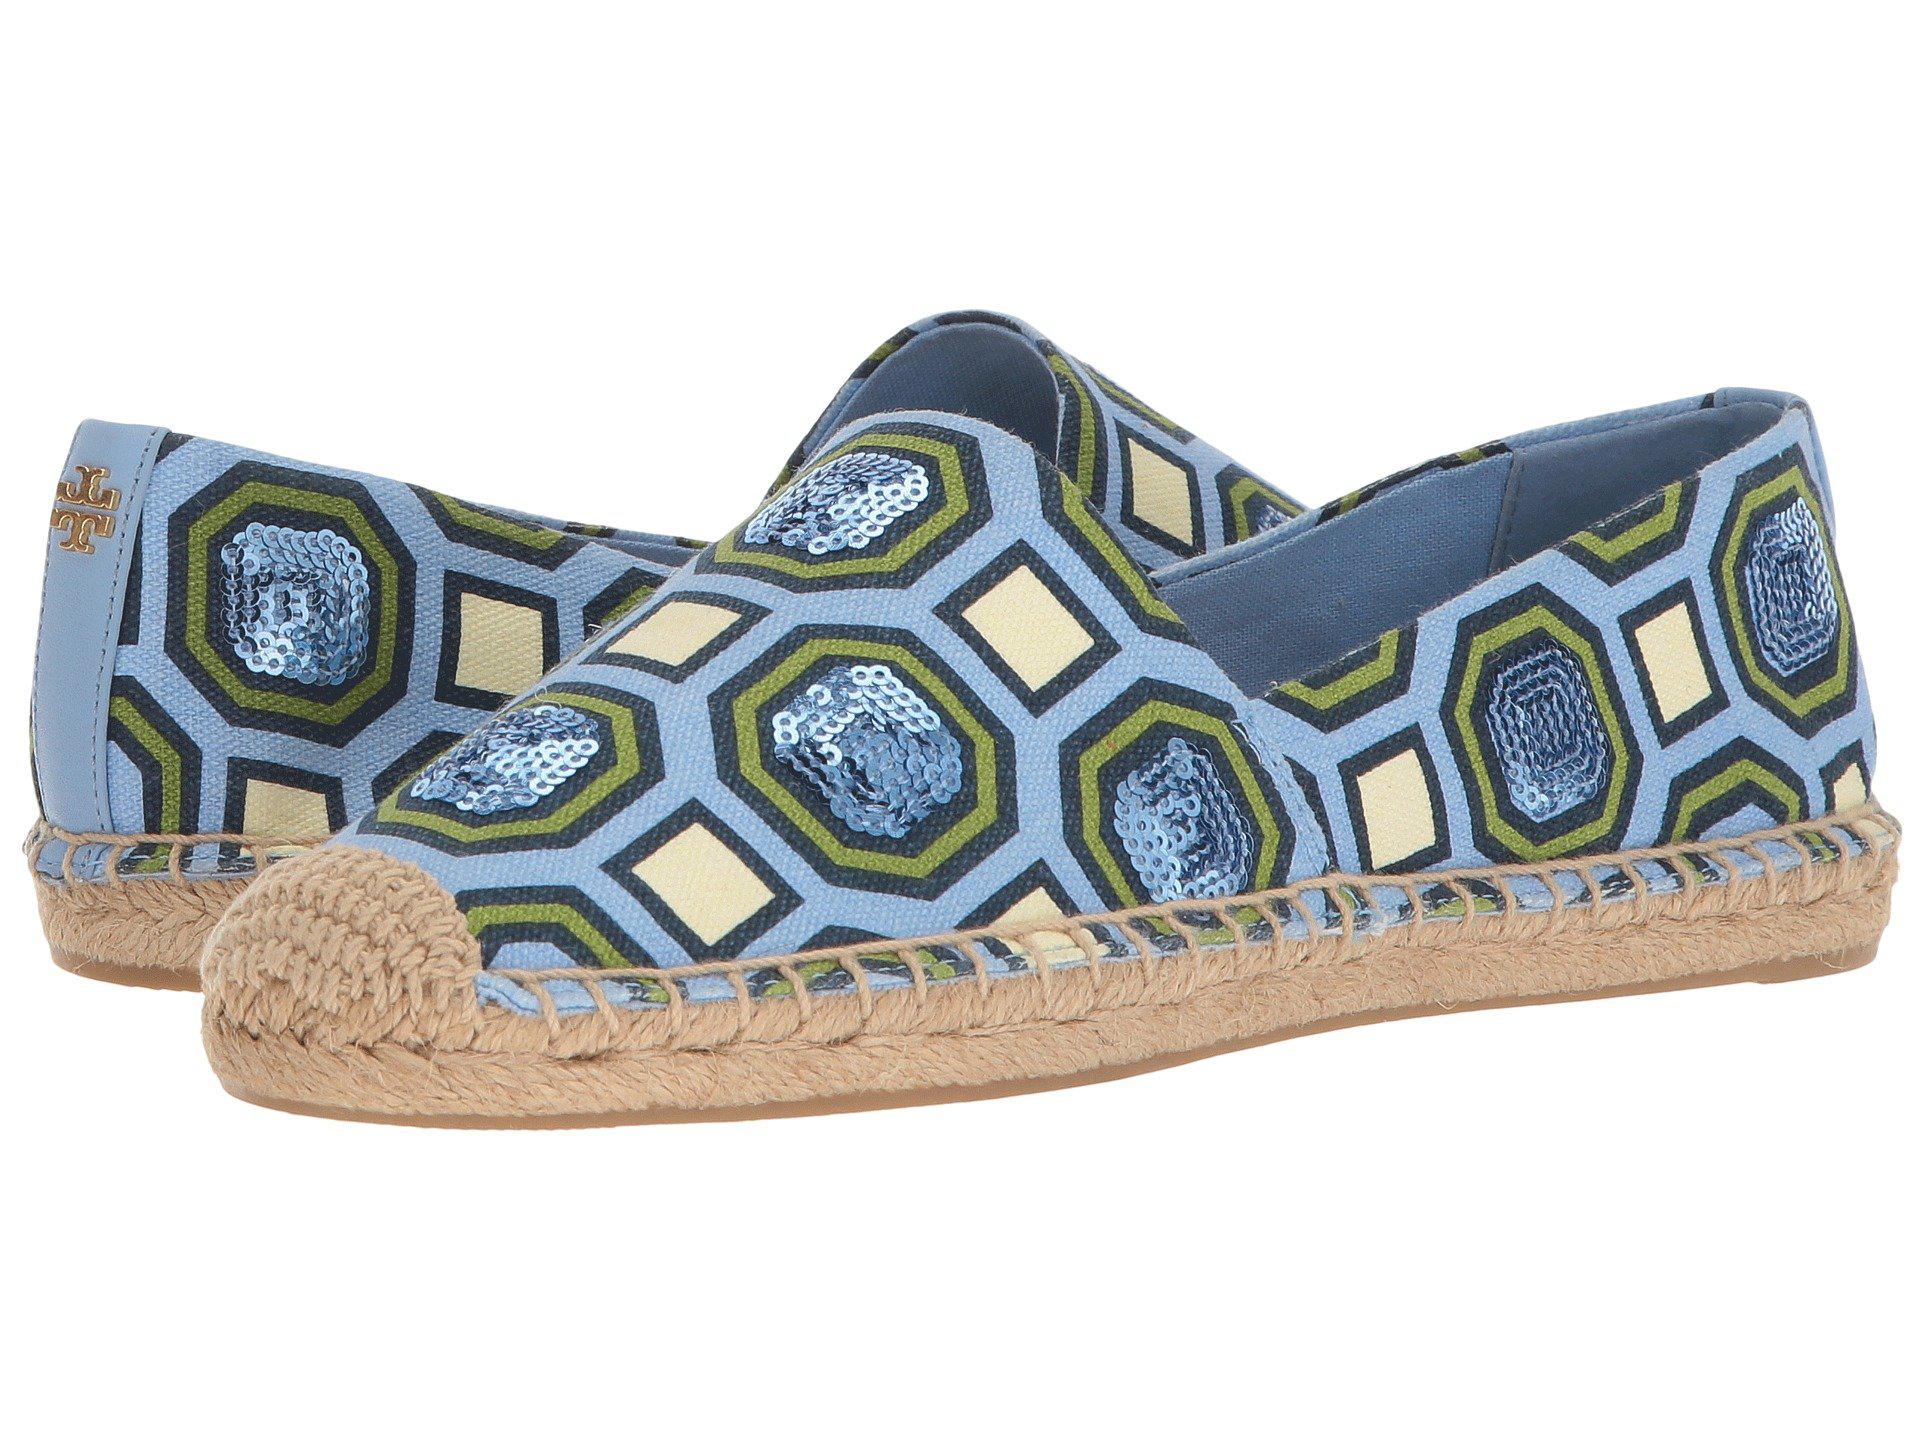 Tory Burch Cecily Embellished Espadrilles in Blue | Lyst